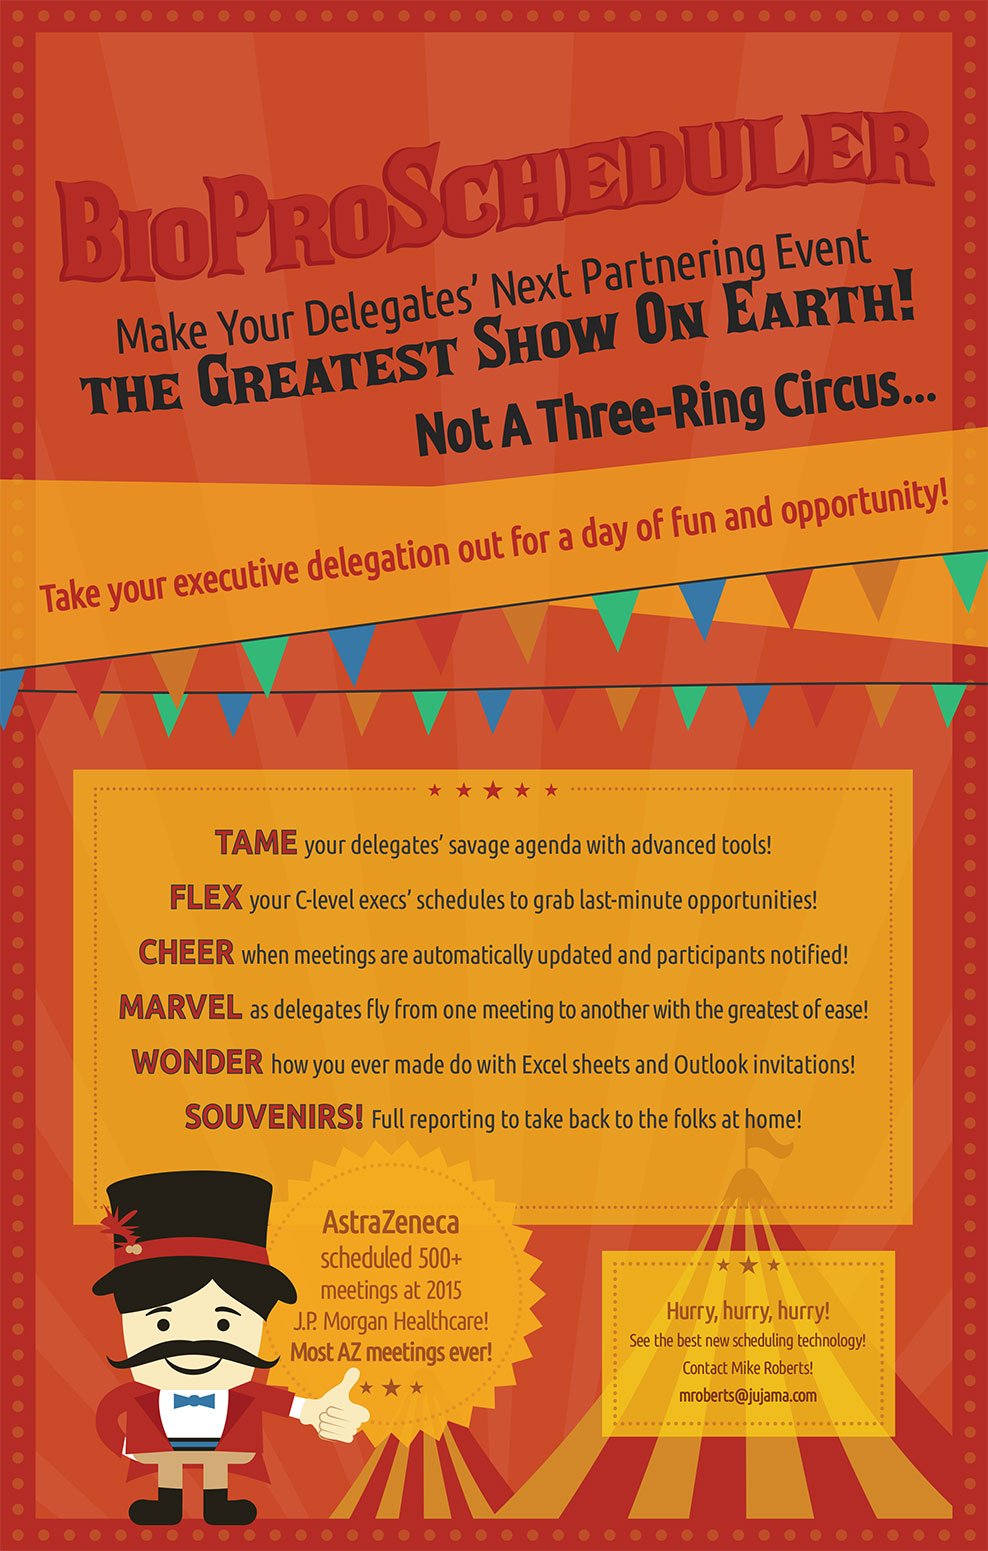 Make Your Delegates’ Next Partnering Event the Greatest Show On Earth!